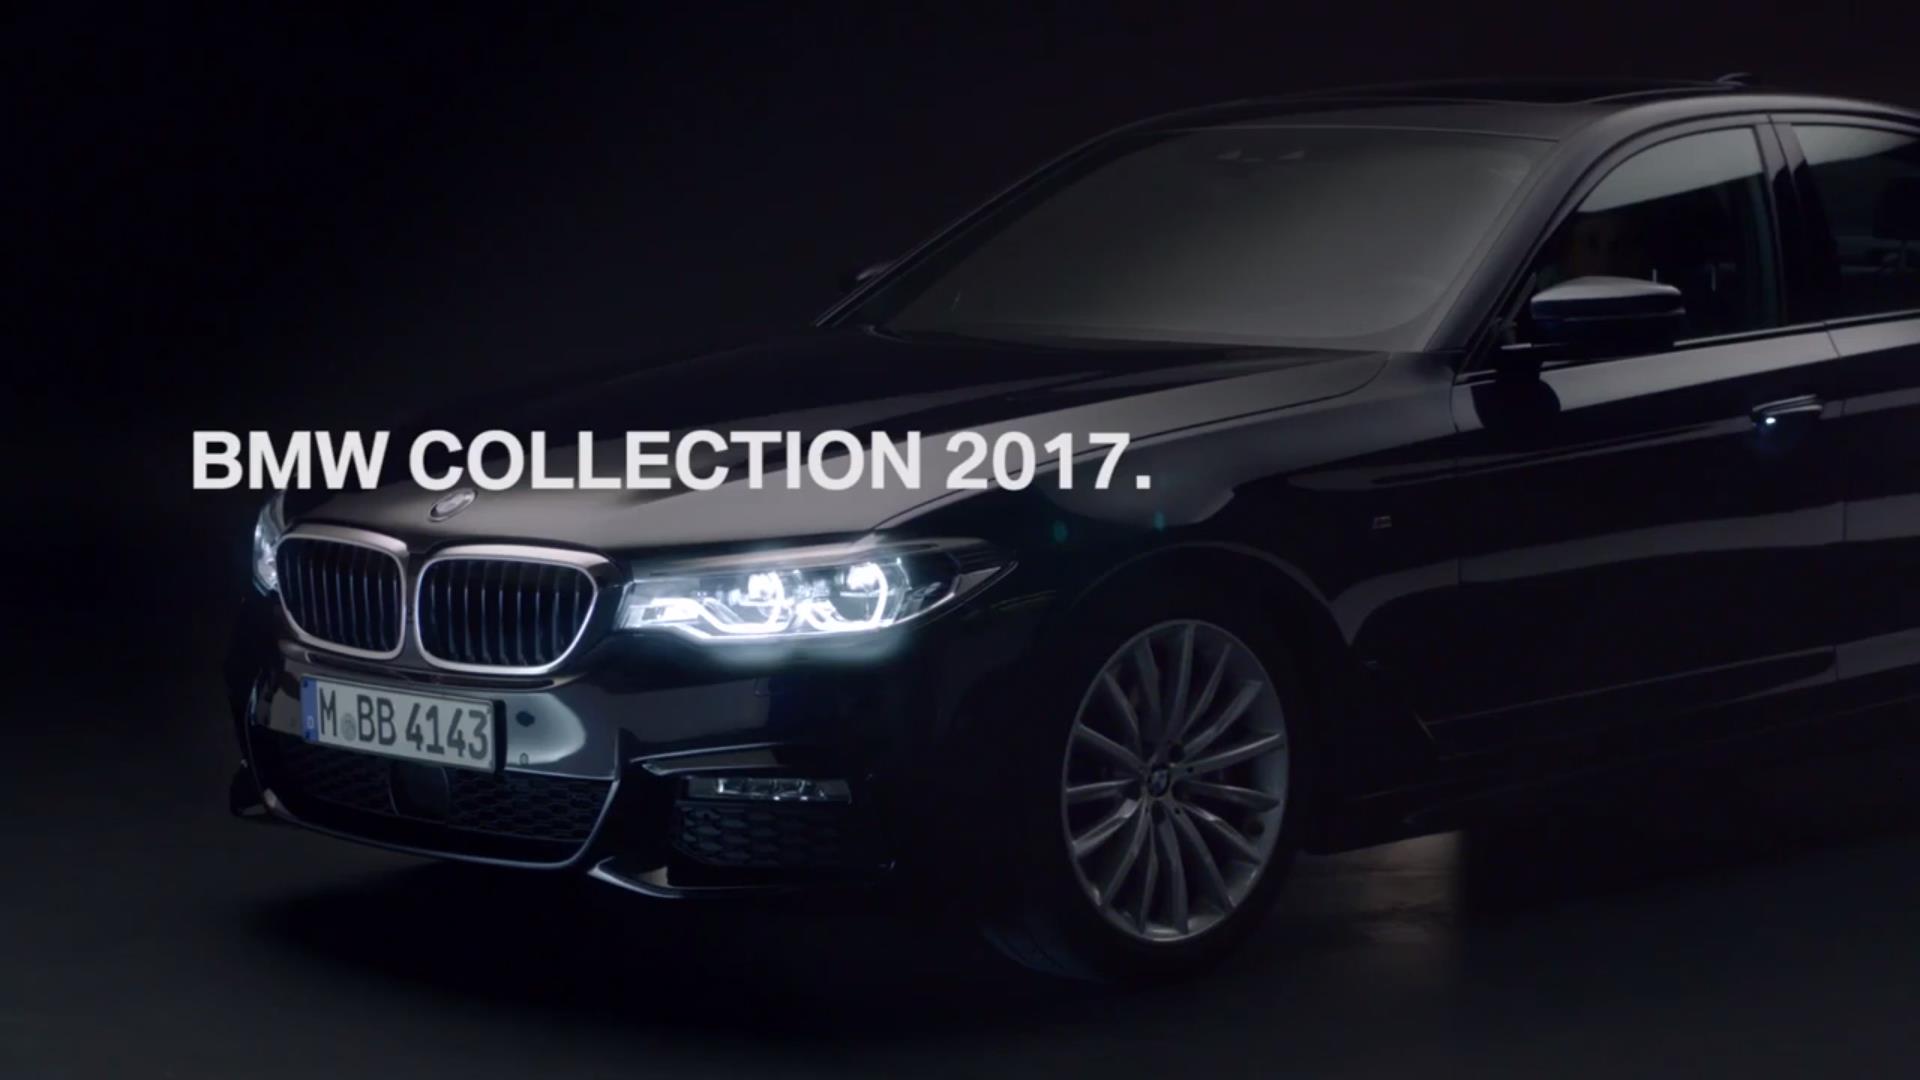 BMW Lifestyle Collection 2017